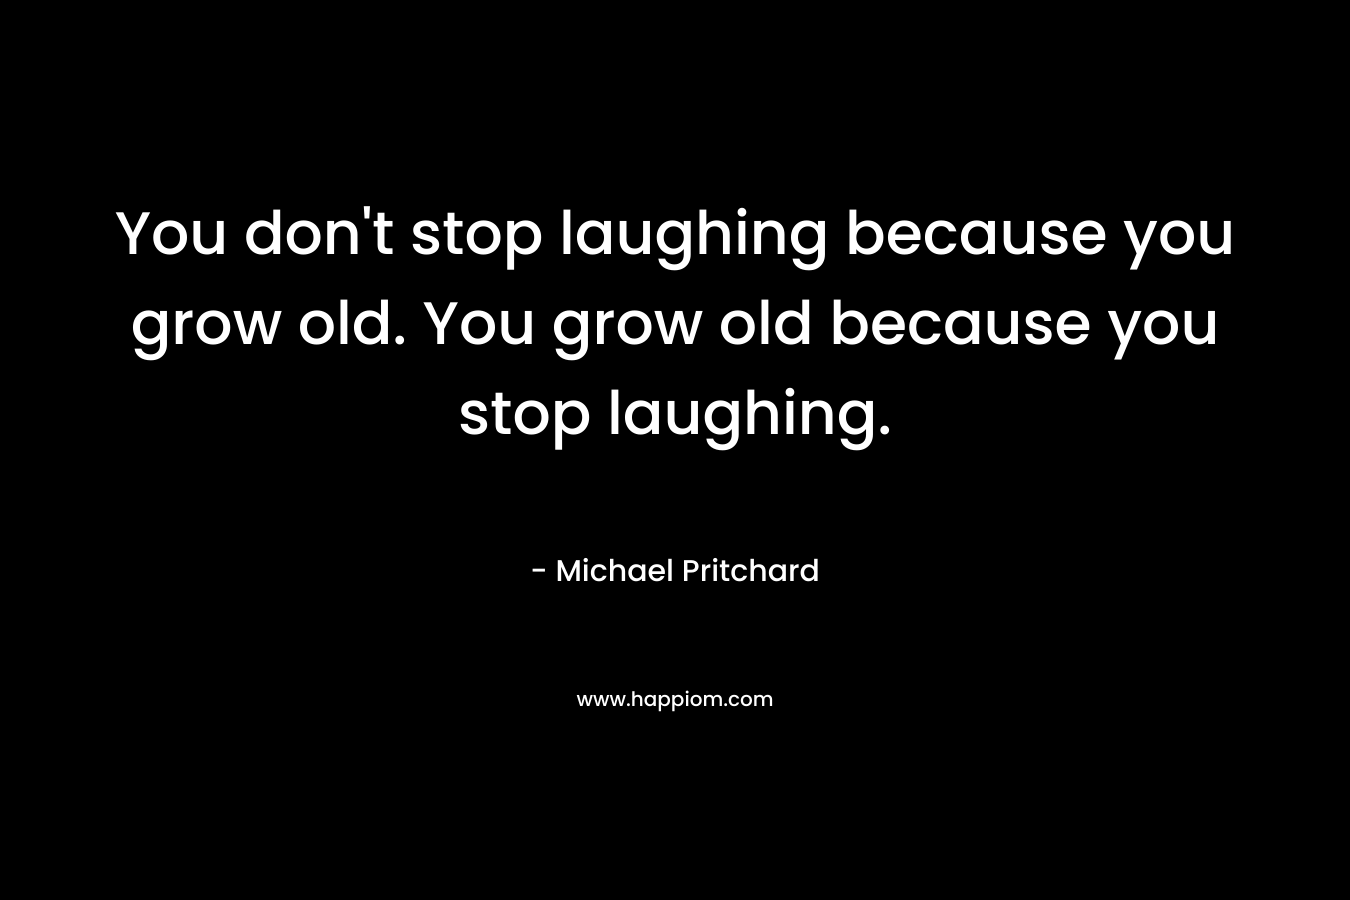 You don't stop laughing because you grow old. You grow old because you stop laughing.